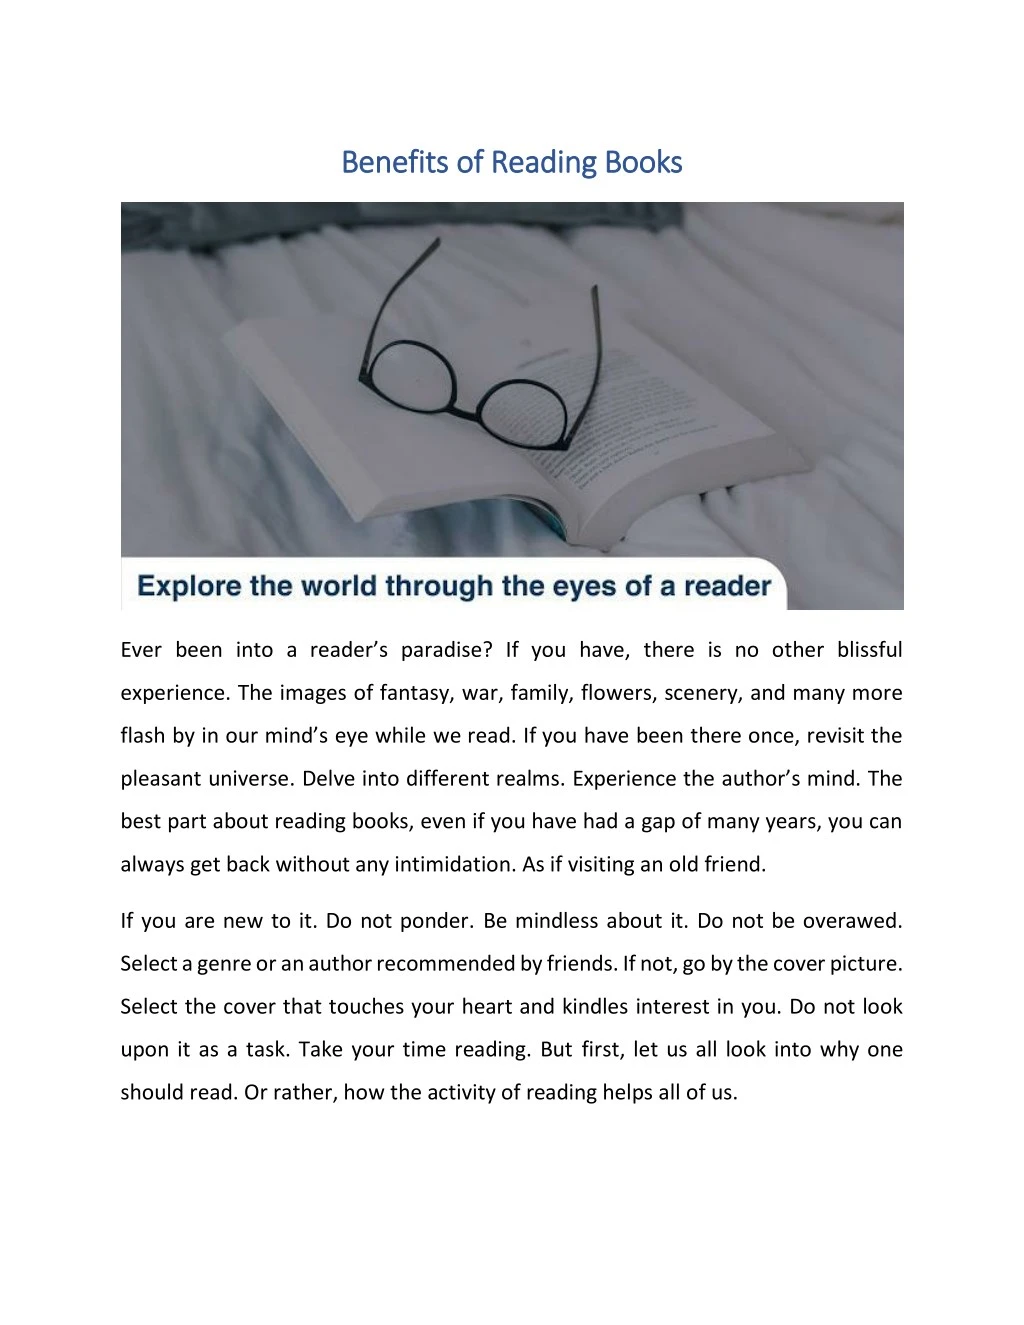 benefits of reading books benefits of reading